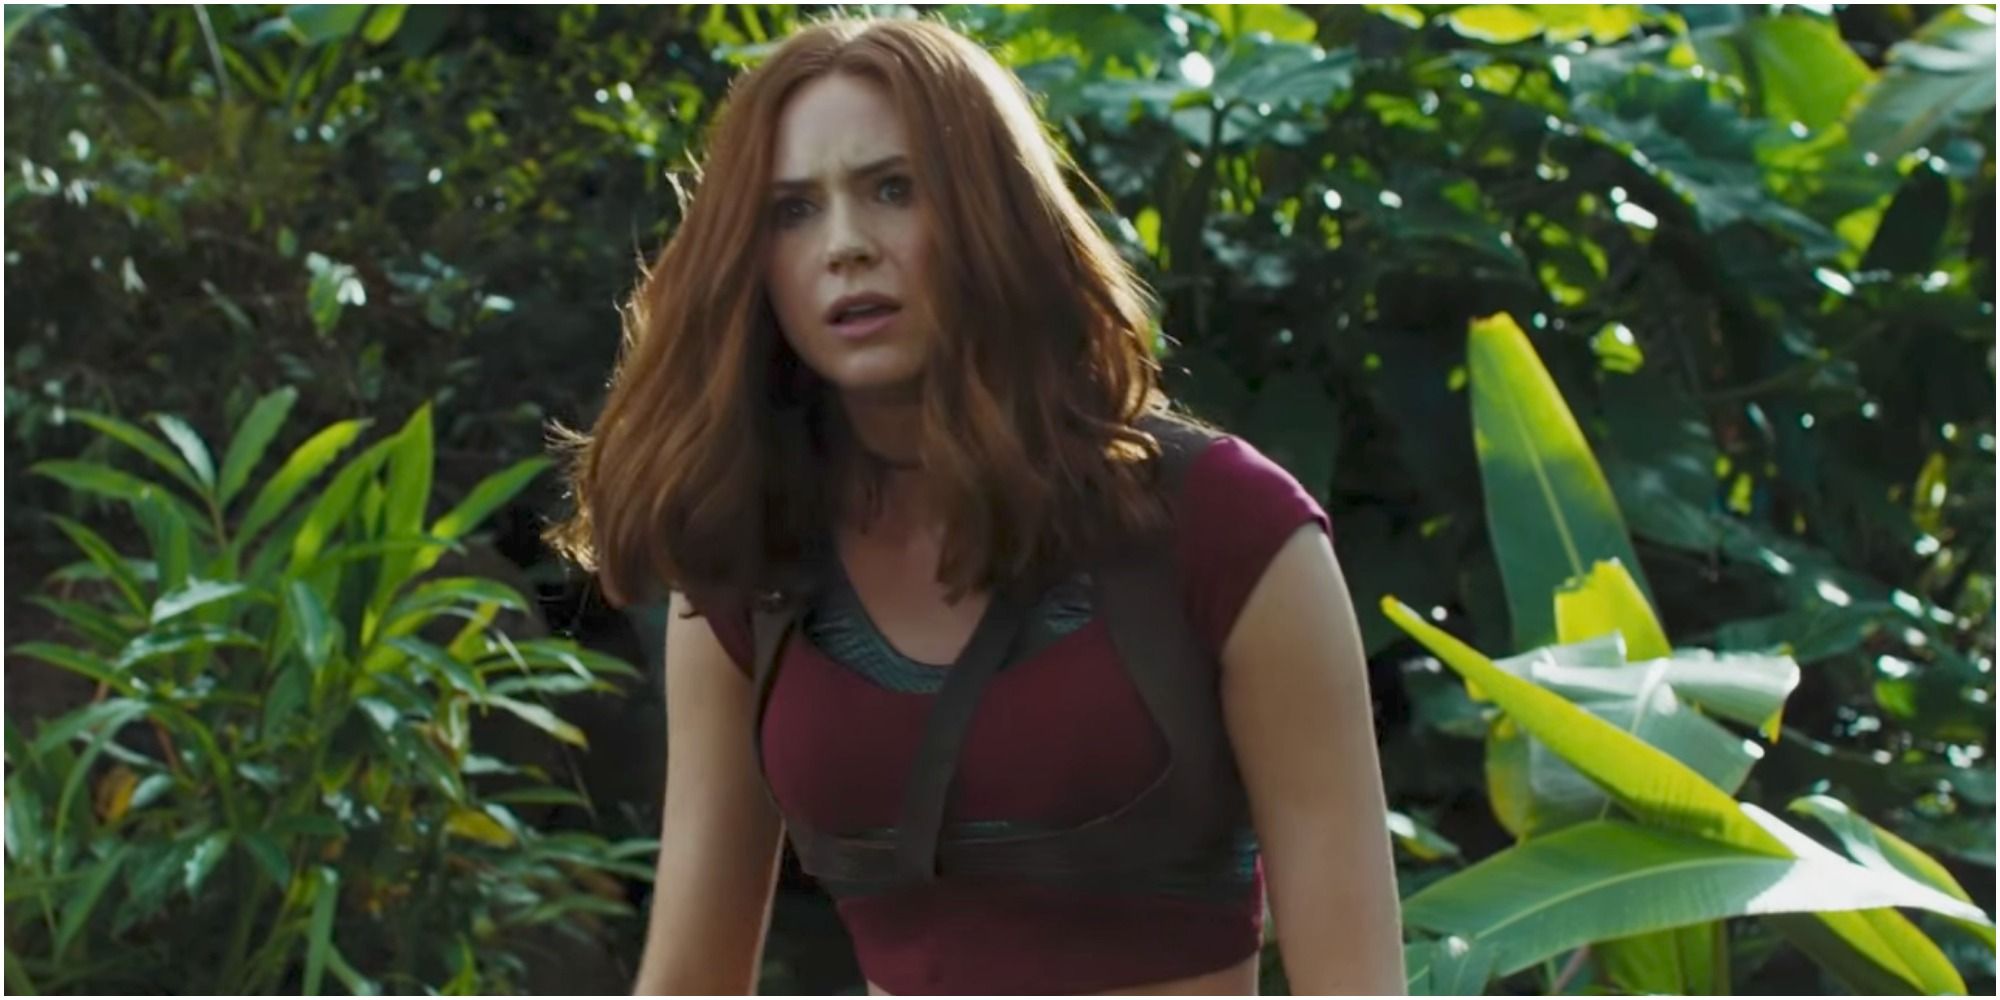 A screenshot of Karen Gillan's Ruby Roundhouse after being dropped in the jungle in Jumanji: Welcome to the Jungle